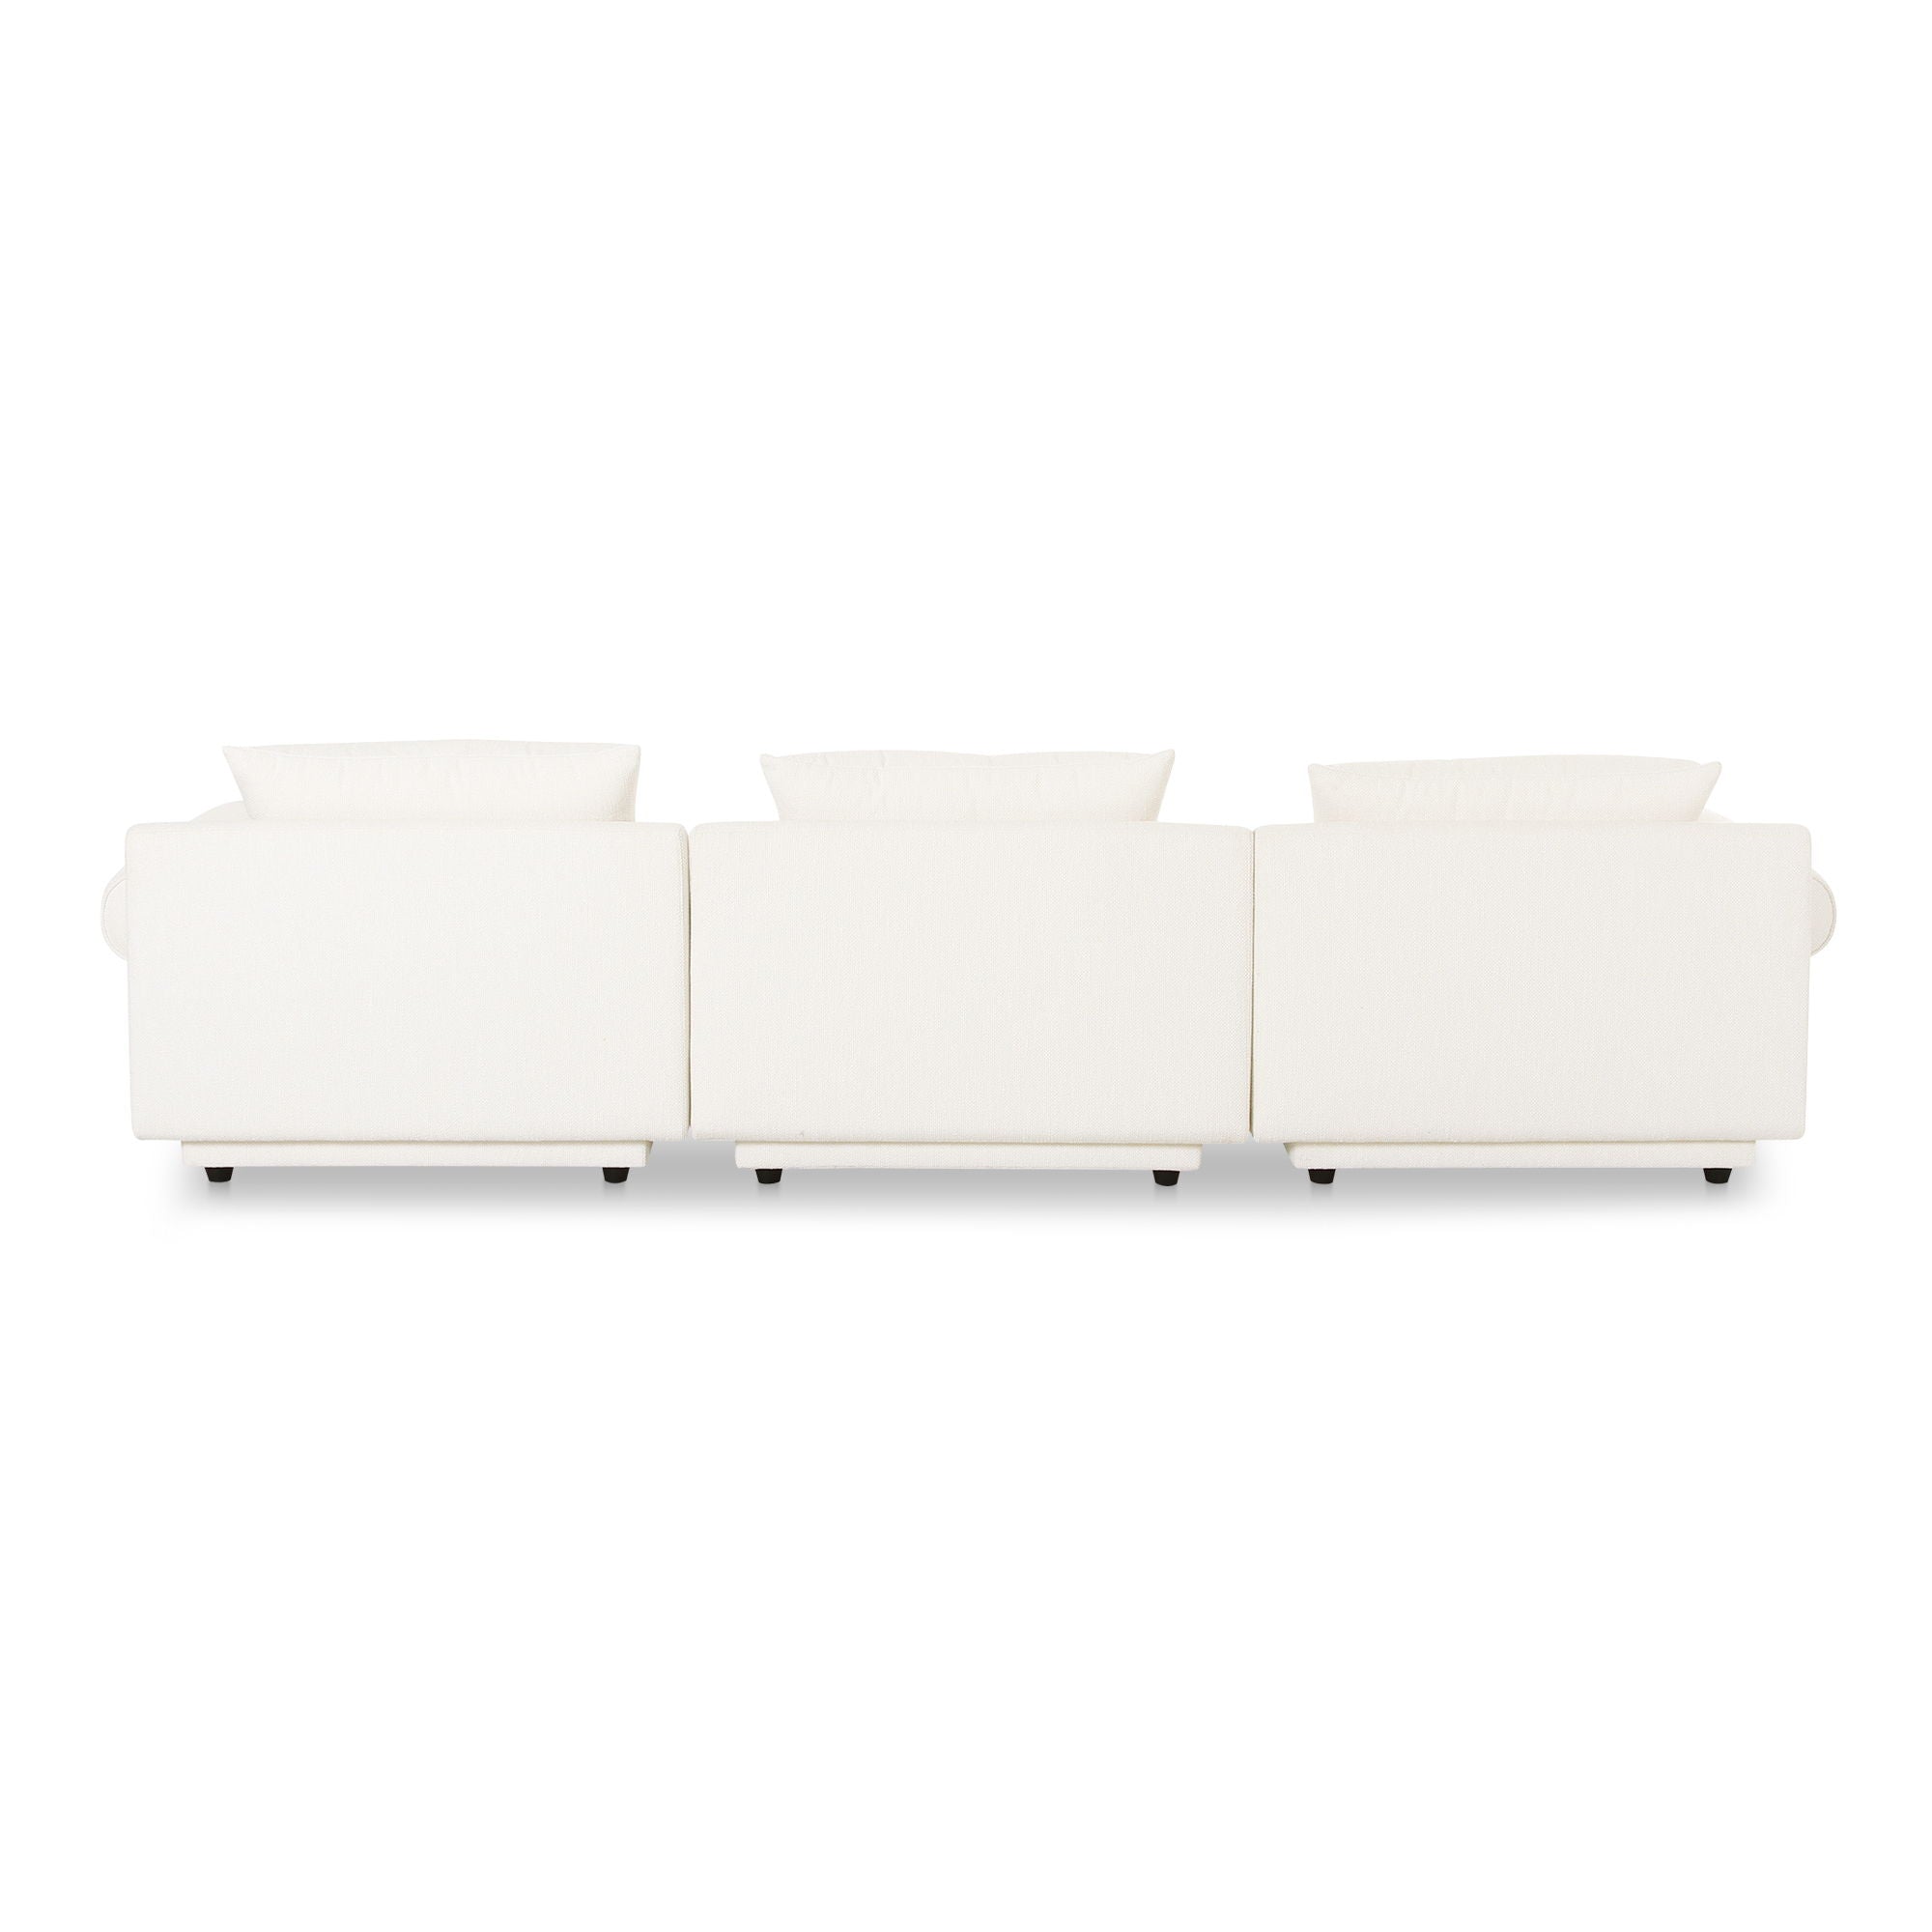 Rosello - Modular Sofa - White-Stationary Sectionals-American Furniture Outlet